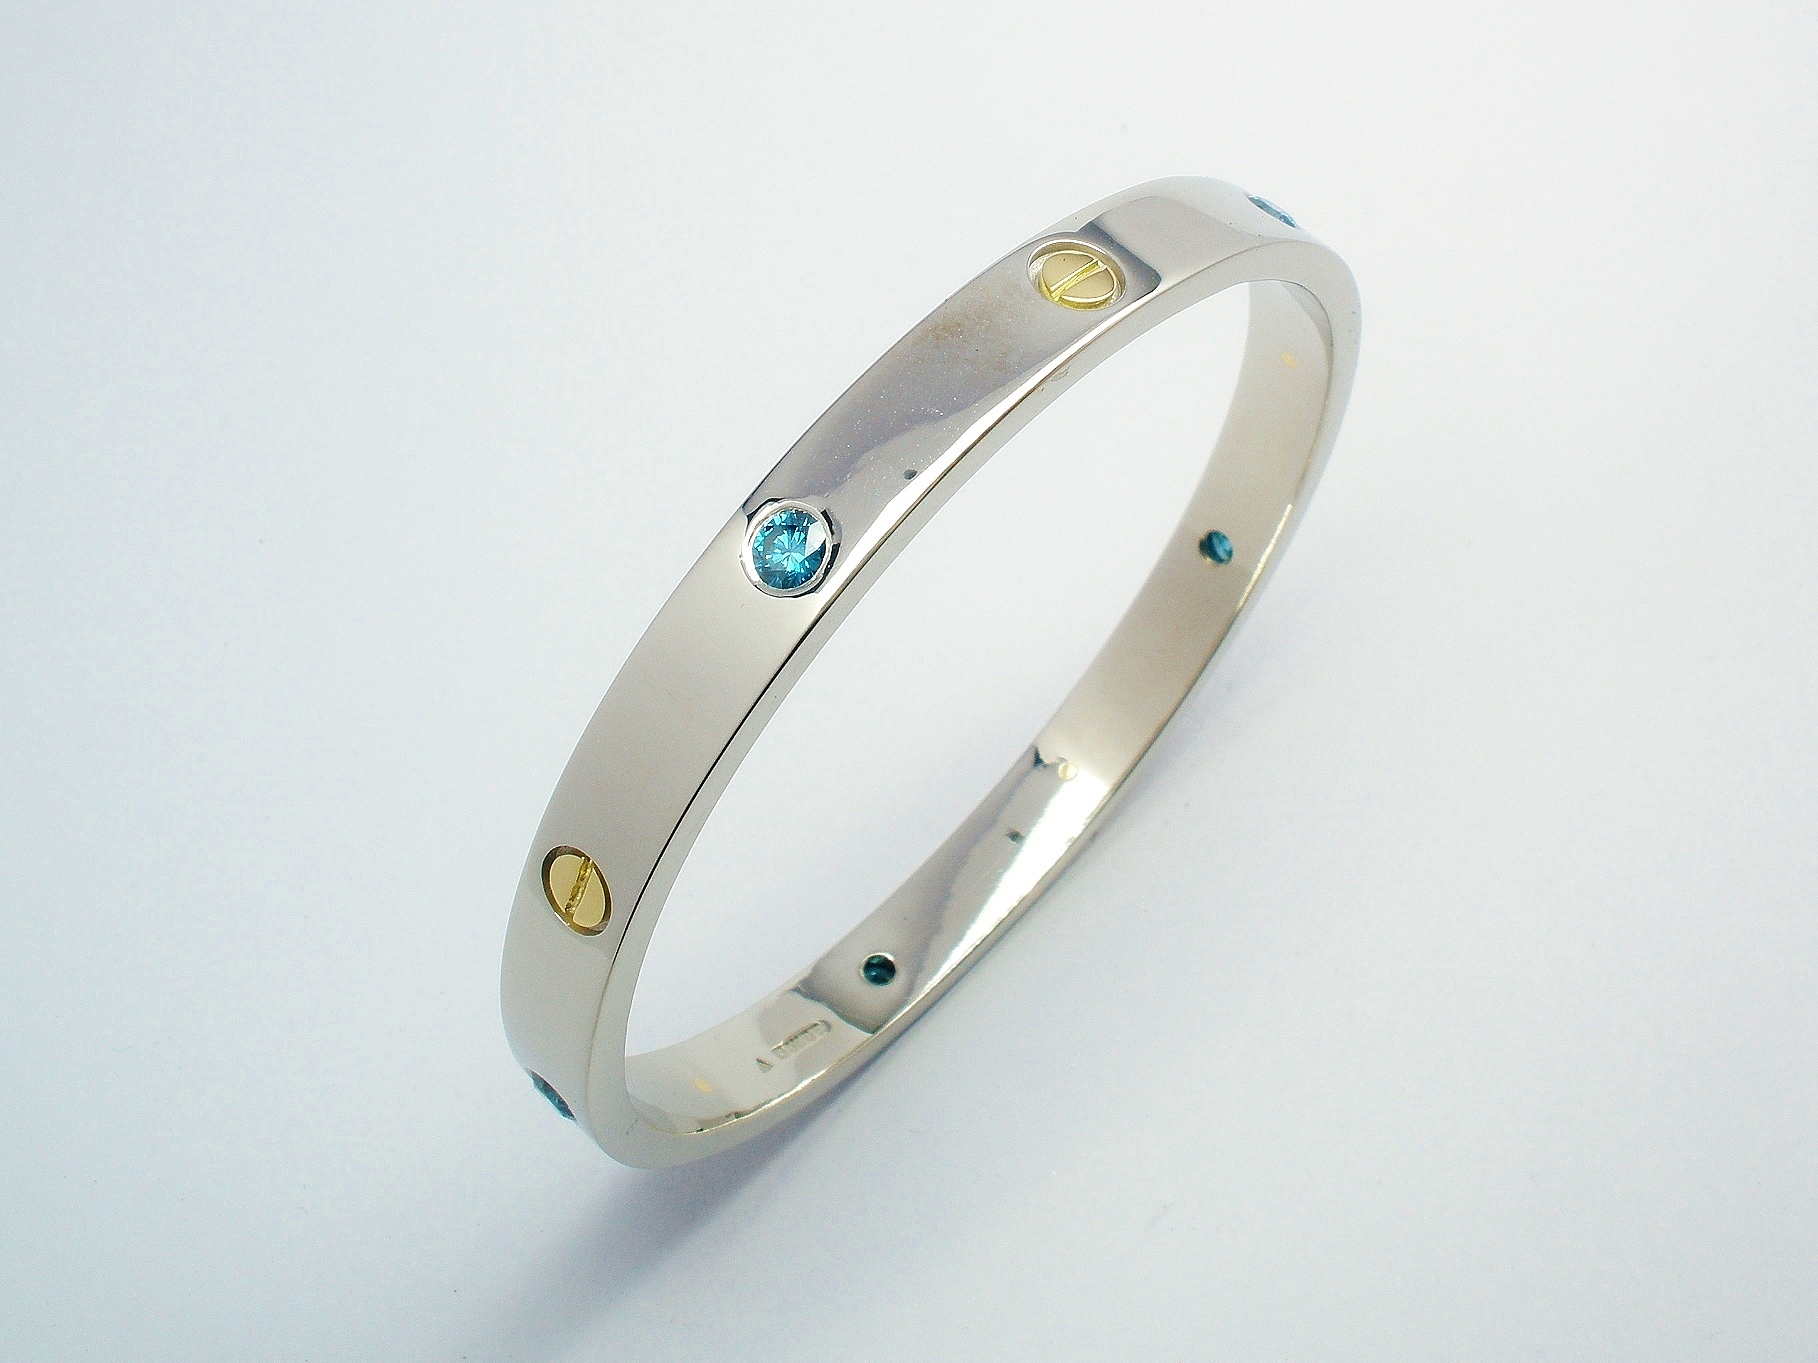 A solid palladium bangle with 18ct. yellow gold 'screw heads' inlayed and flush set with ocean blue round brilliant cut diamonds evenly spaced around and alternating with the screw heads.